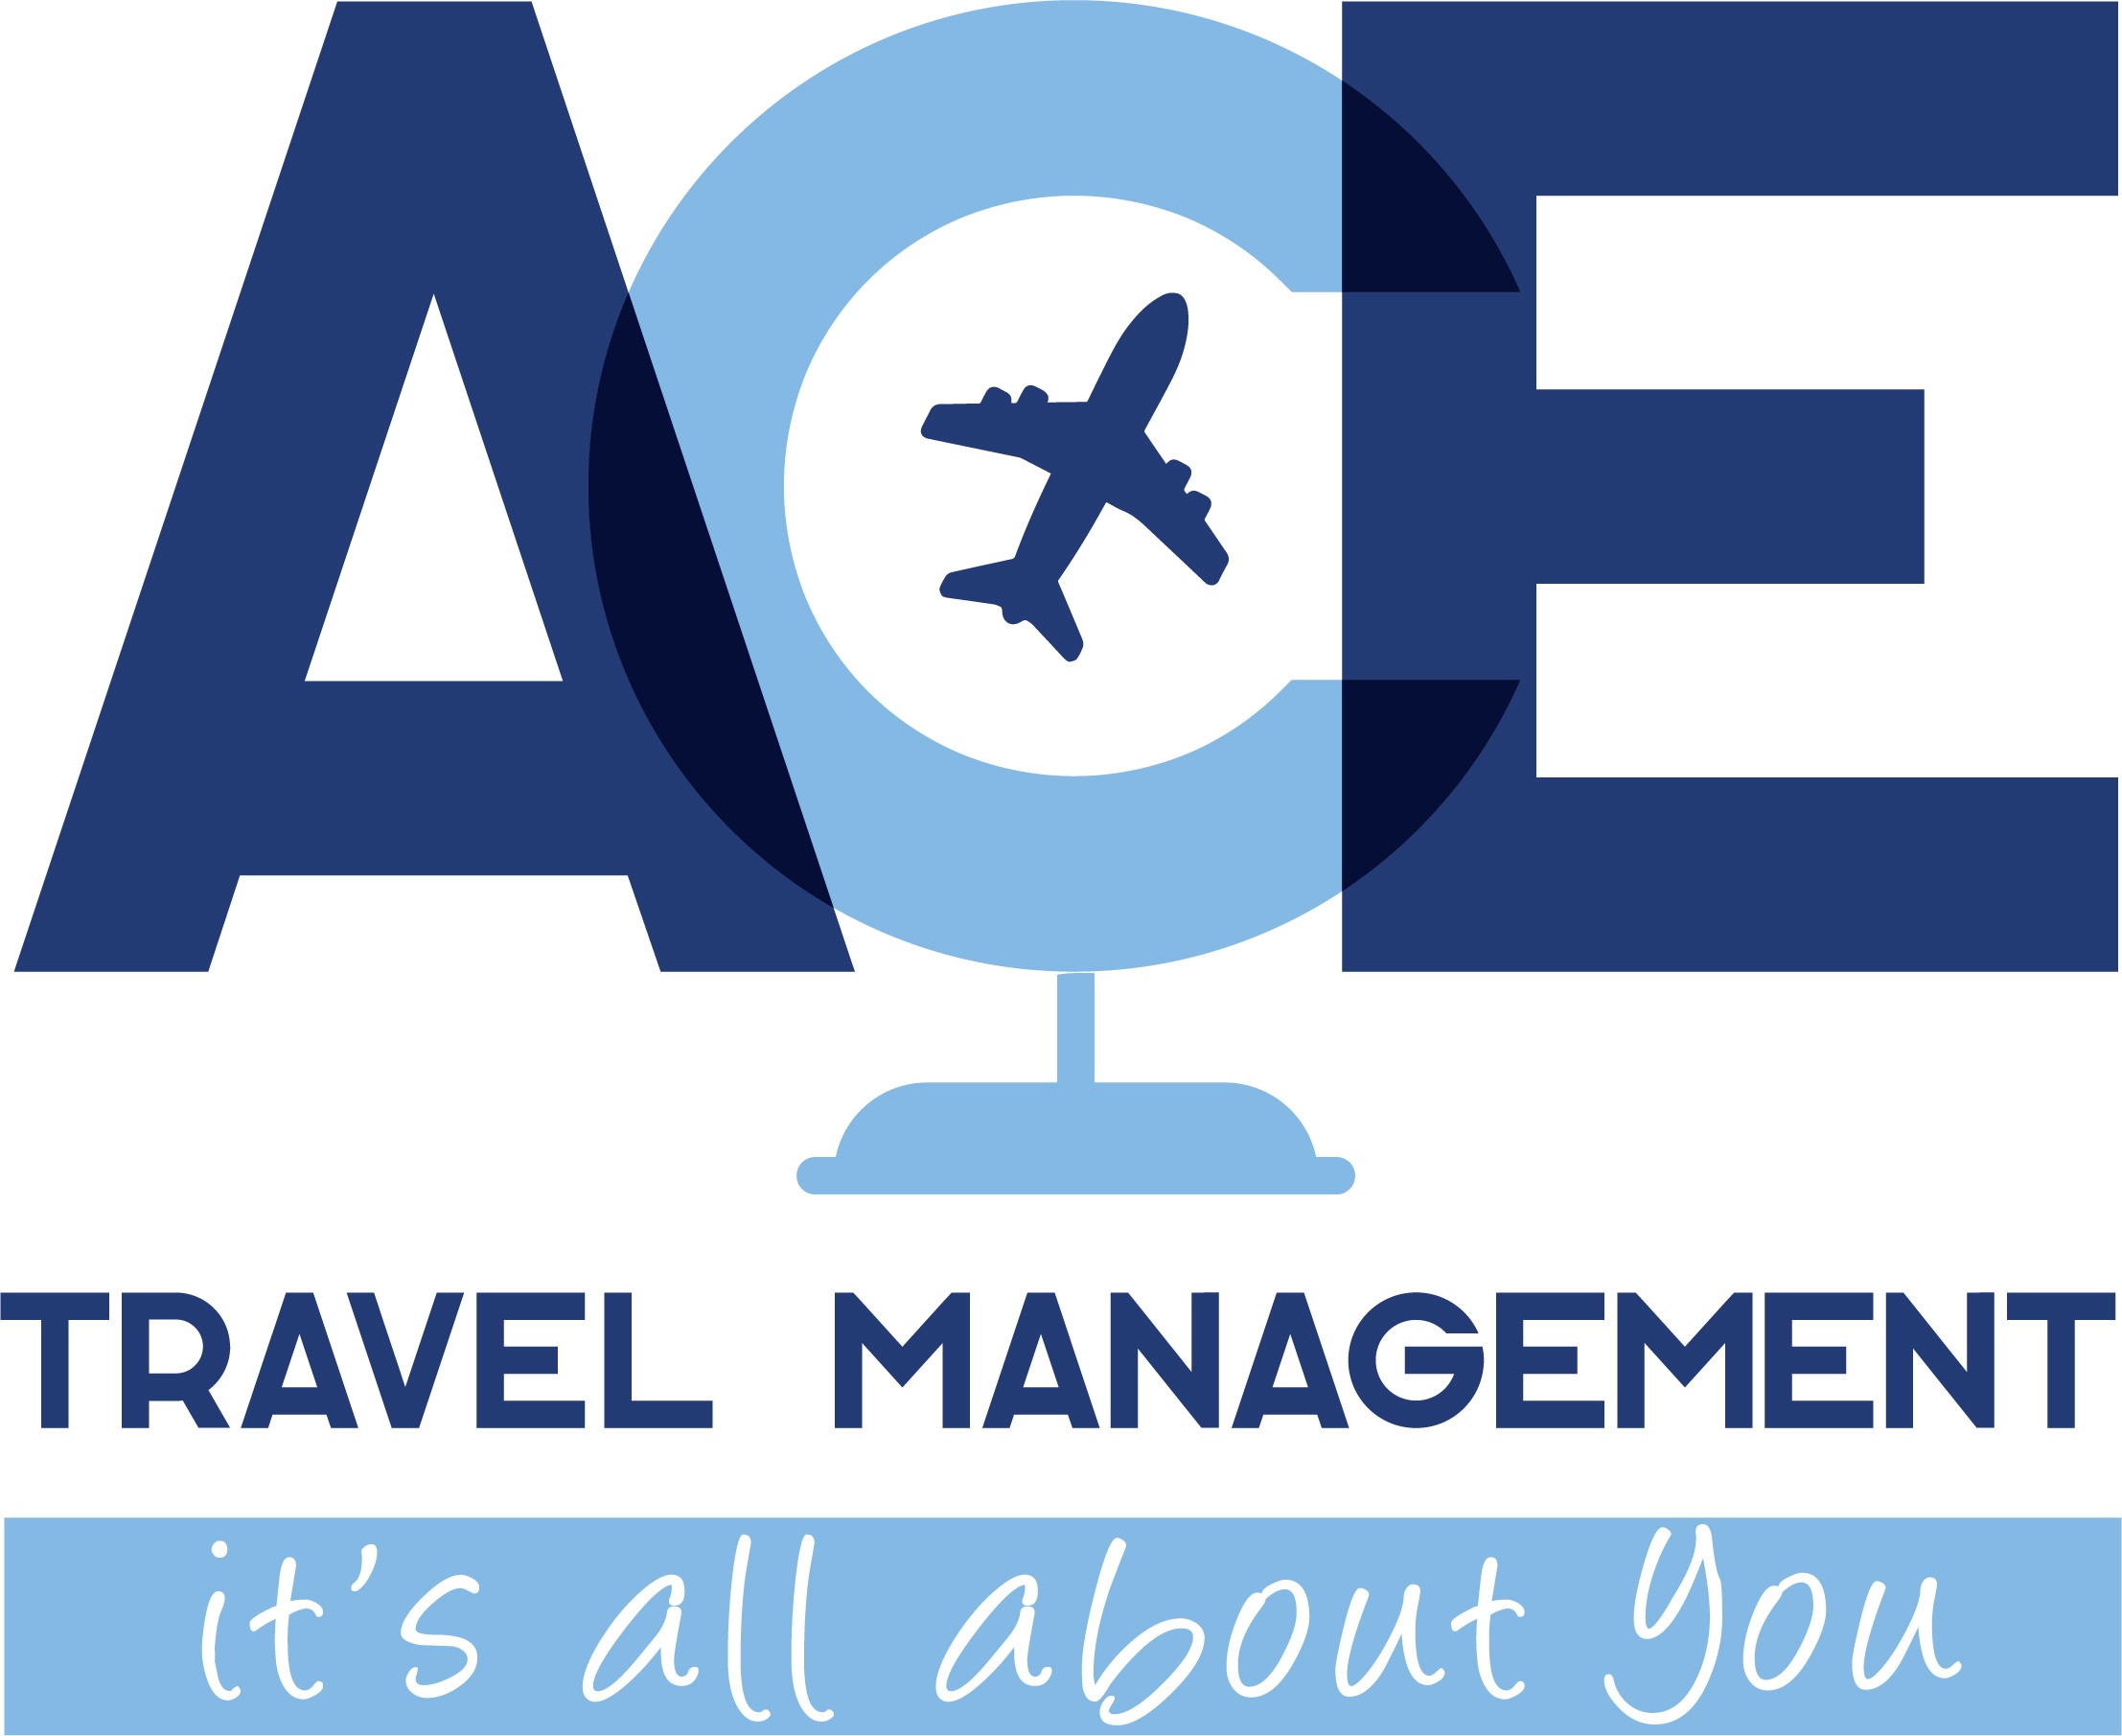 travel ace policy wording